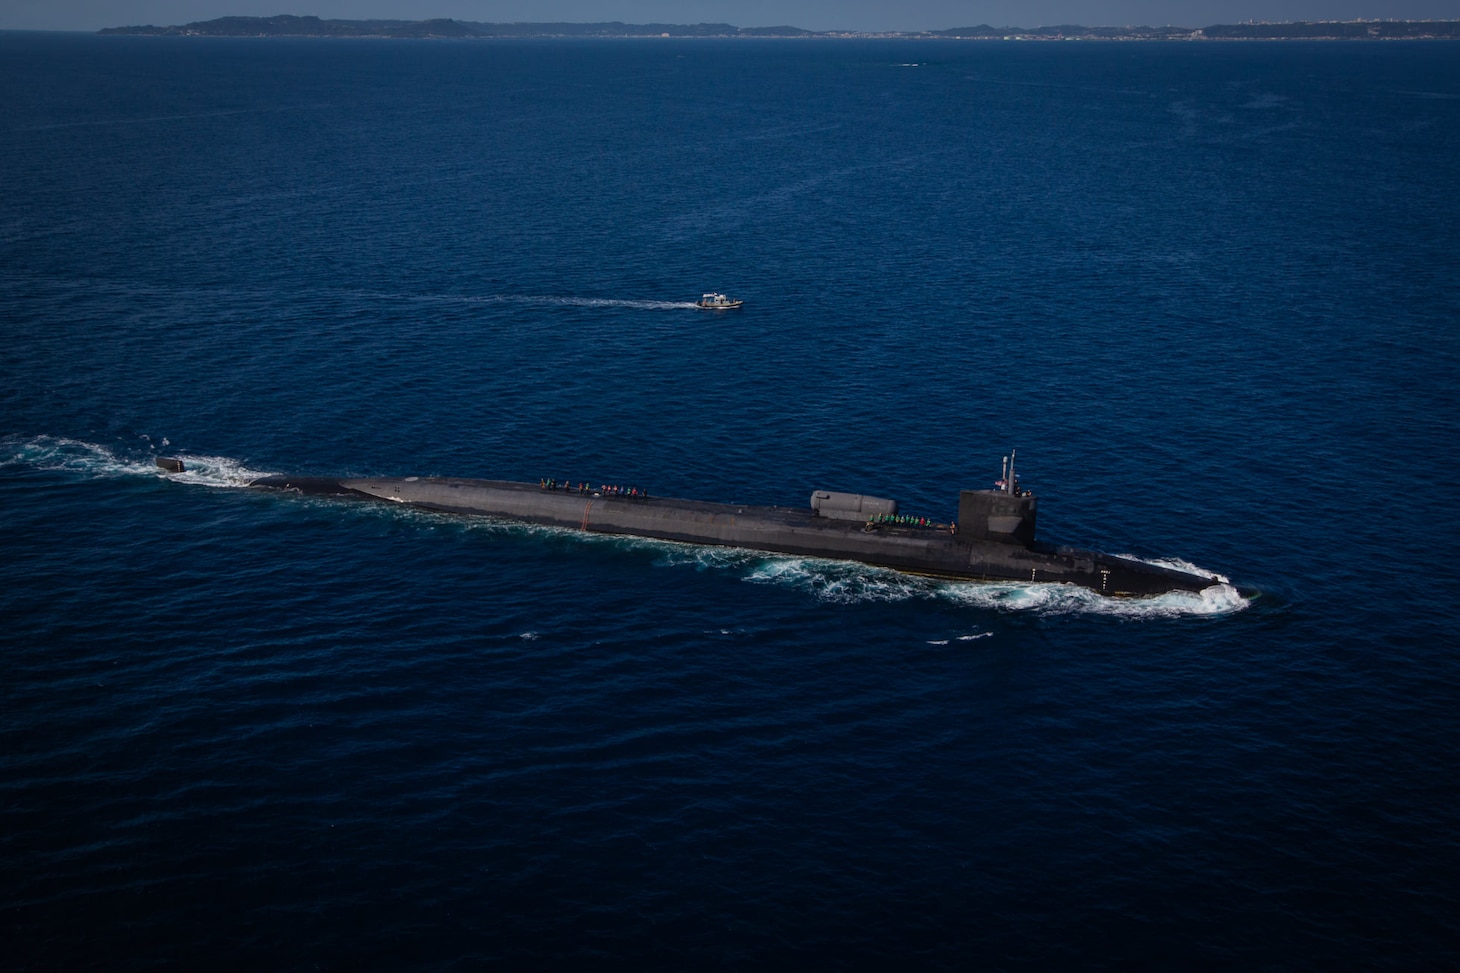 PHILIPPINE SEA (Feb. 2, 2021) The Ohio-class guided-missile submarine USS Ohio (SSGN 726), deployed to U.S. 7th Fleet area of operations, rendezvous with a combat rubber raiding craft, attached to U.S. Marine Corps Force Reconnaissance Company, III Marine Expedition Force (MEF), for an integration exercise off the coast of Okinawa, Japan. The exercise was part of ongoing III MEF-U.S. 7th Fleet efforts to provide flexible, forward-postured and quick response-options to regional commanders. (U.S. Marine Corps photo by Sgt. Audrey M. C. Rampton)